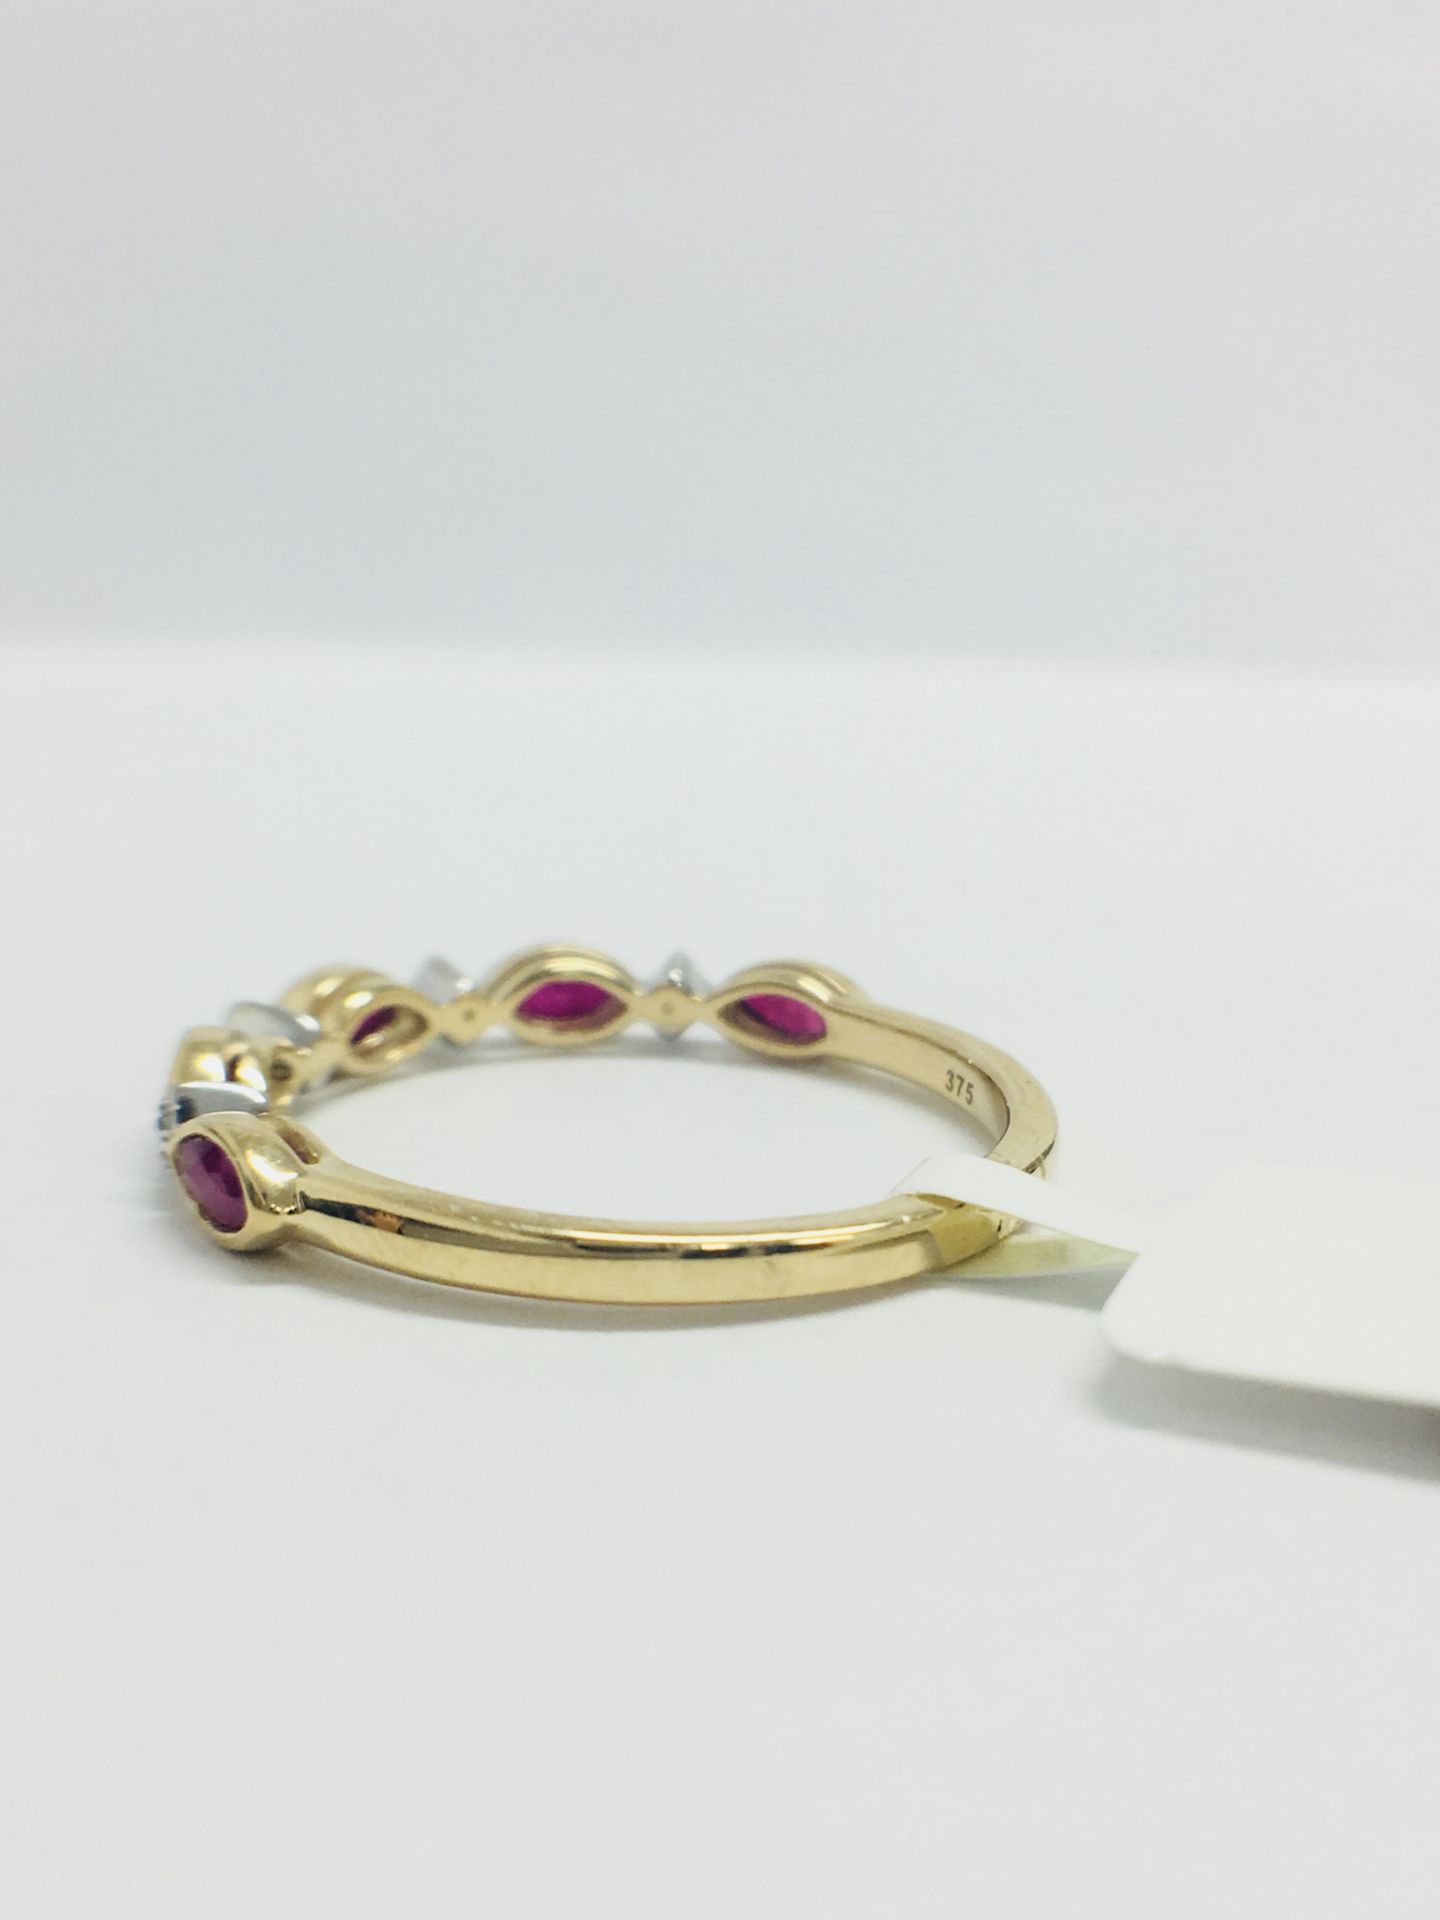 9ct Yellow Gold Ruby Diamond Band Ring - Image 3 of 9